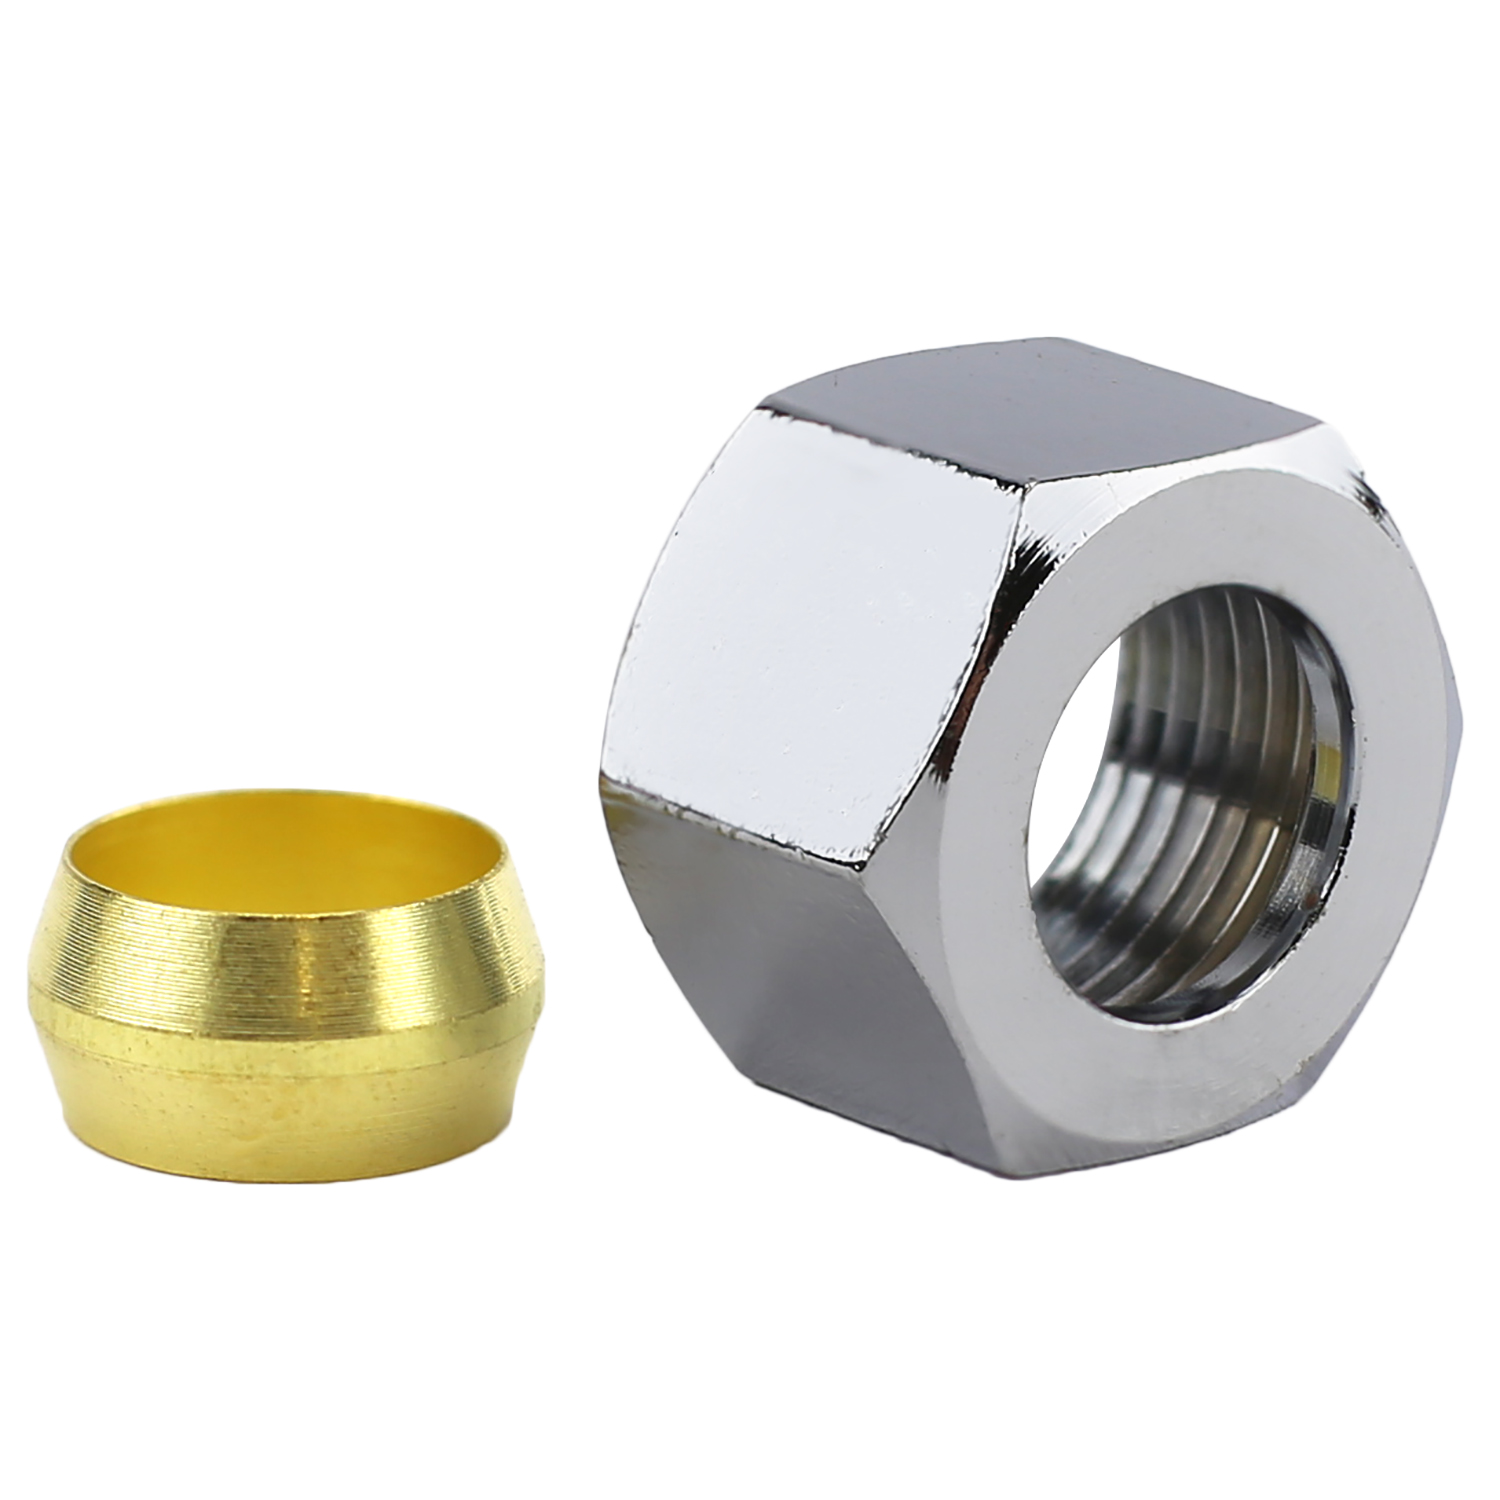 17-6135 Nut and Sleeve, 3/8 in, Compression, Brass, Chrome